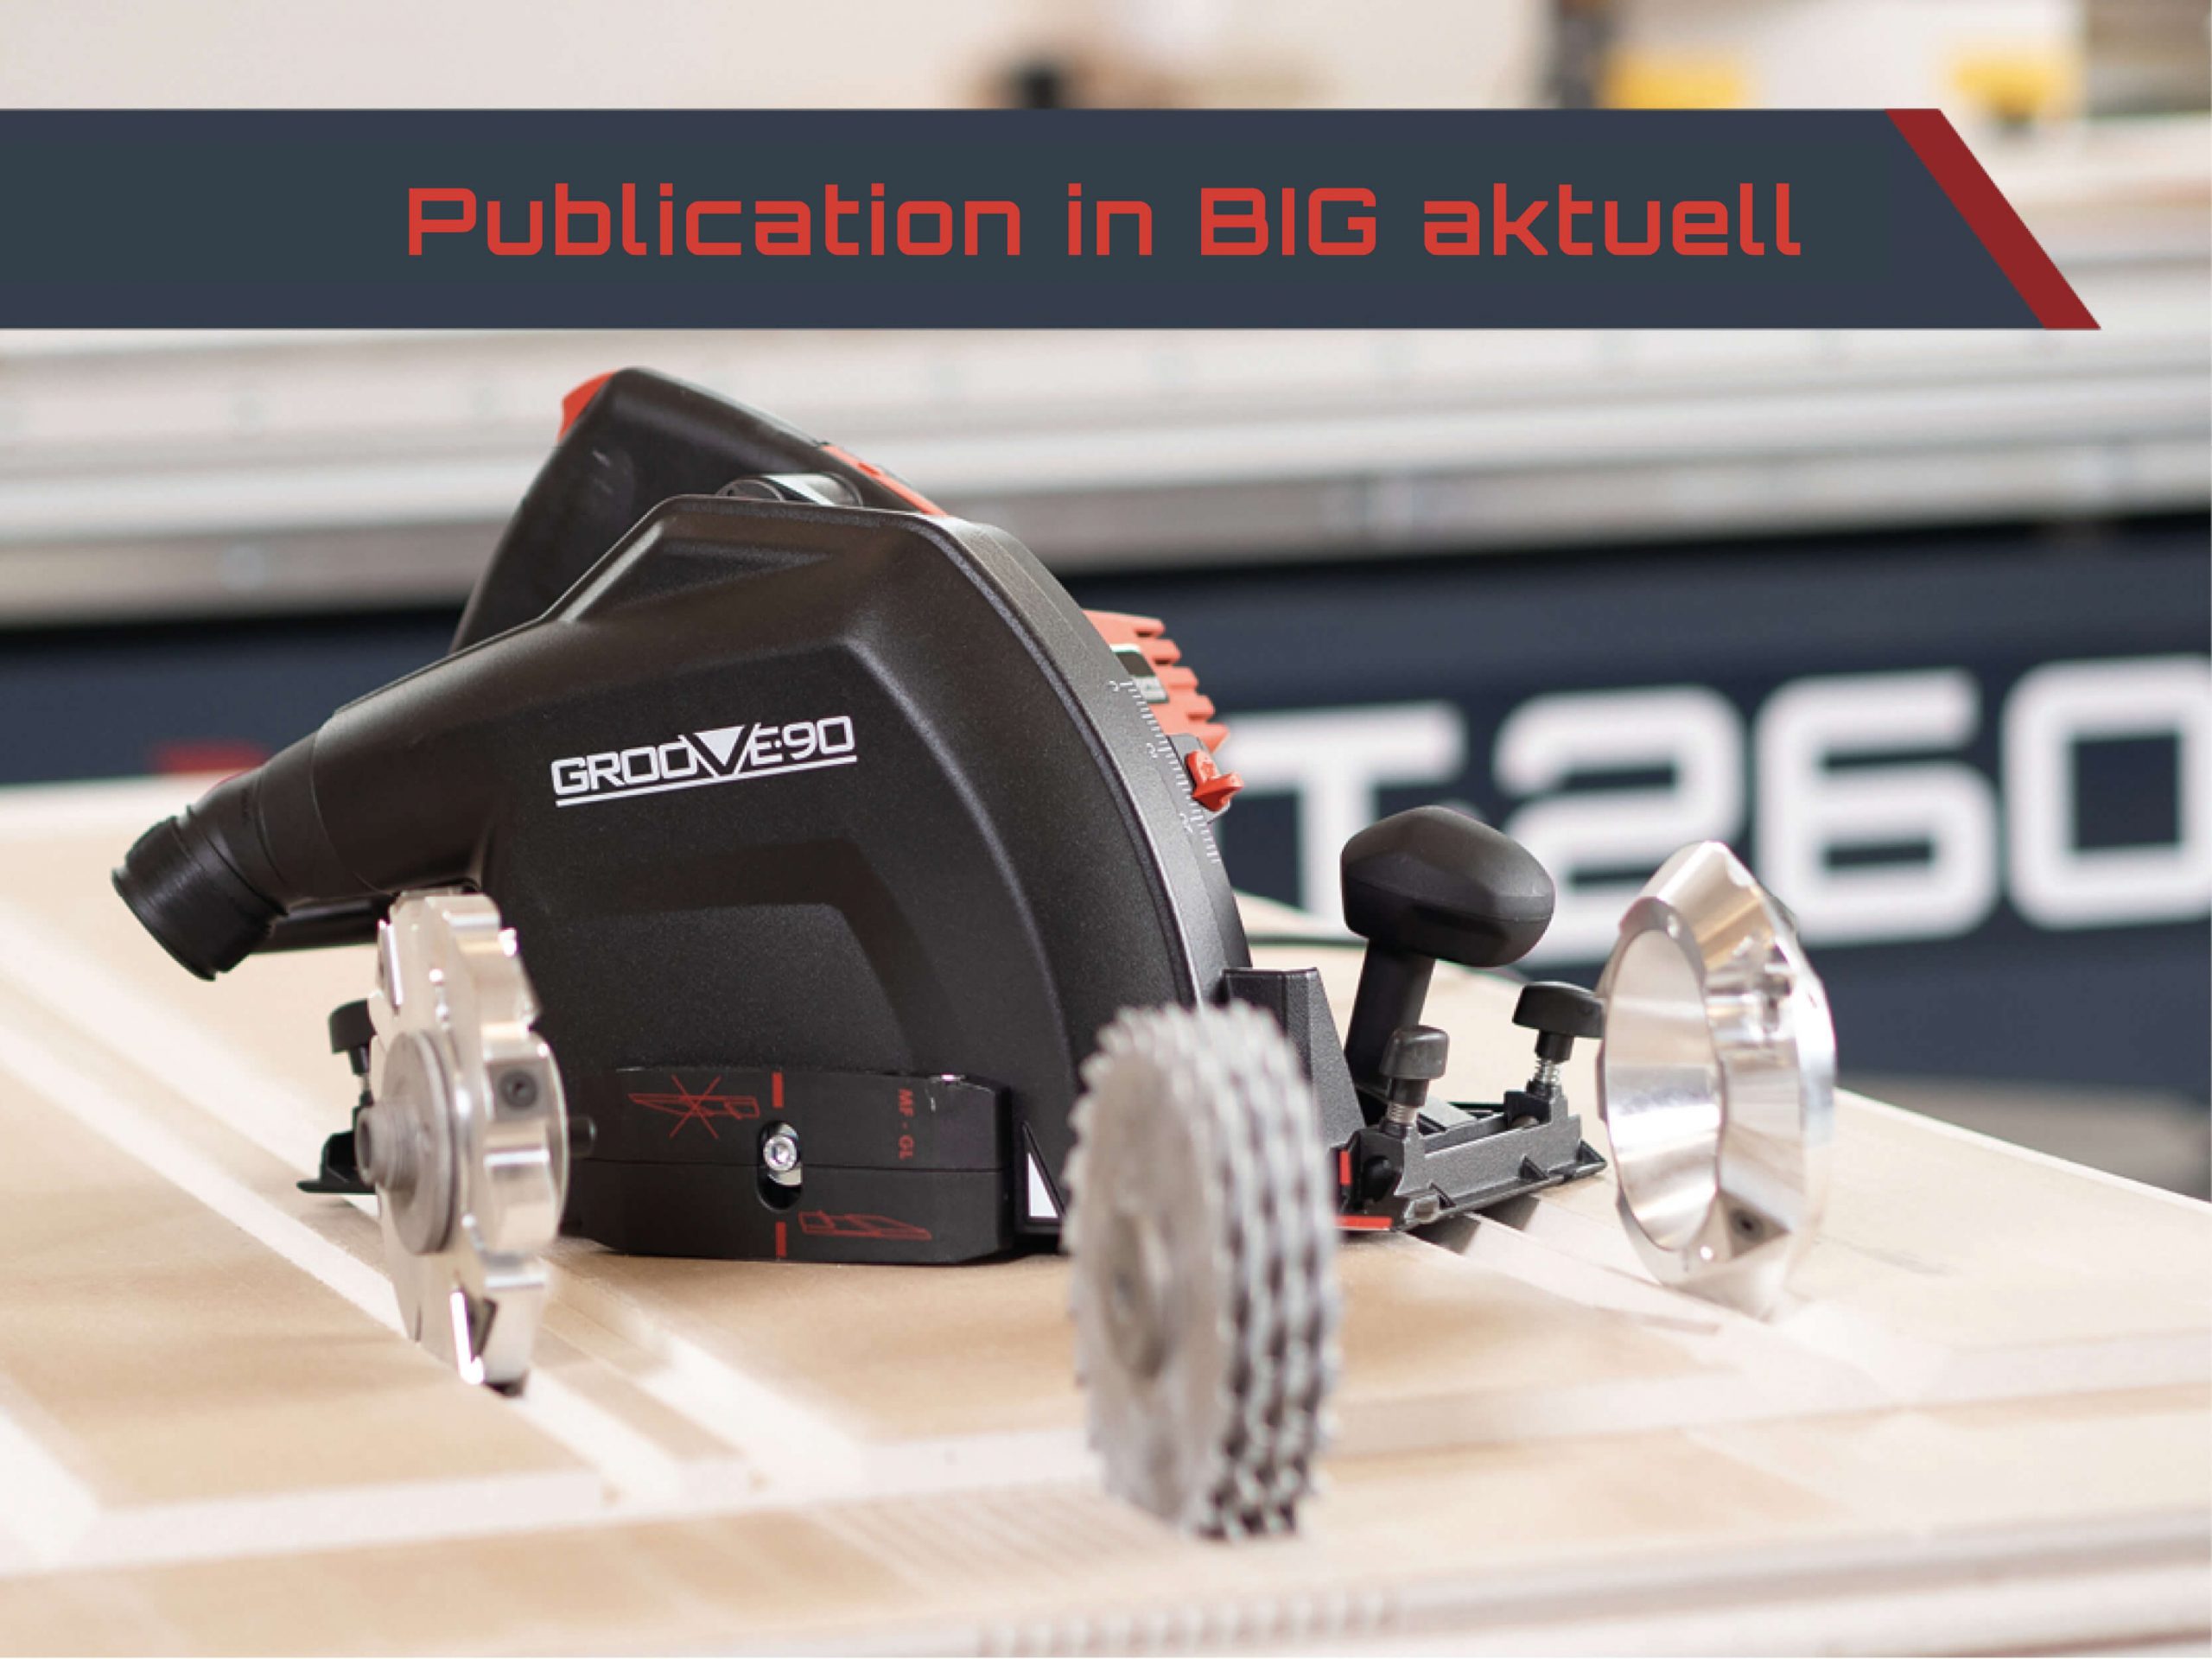 Our technical article in BIG aktuell